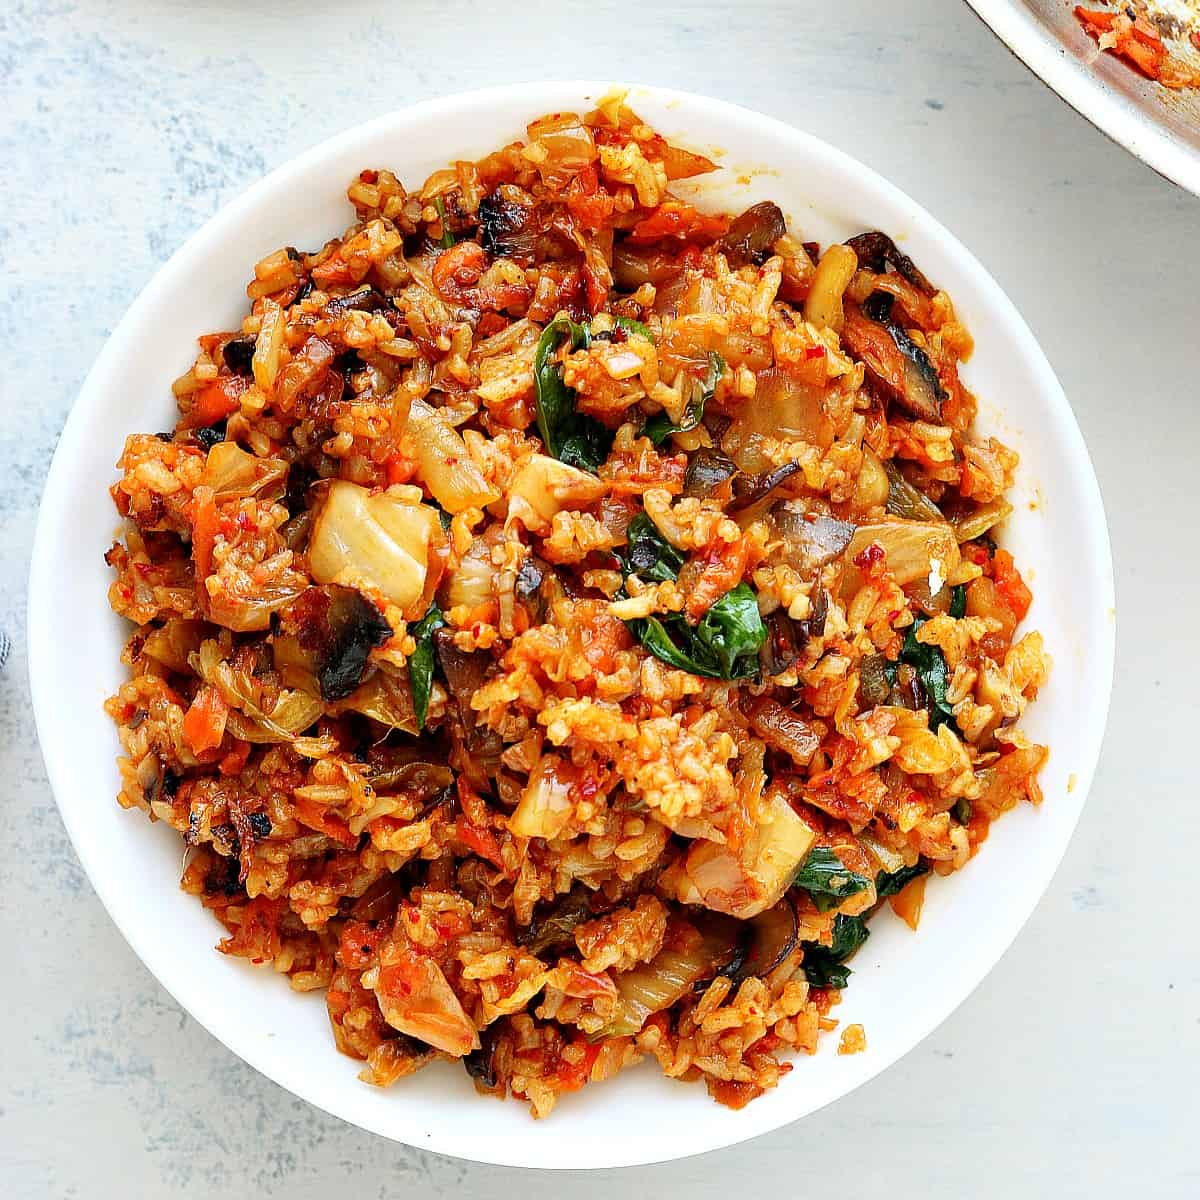 Kimchi rice in a bowl.